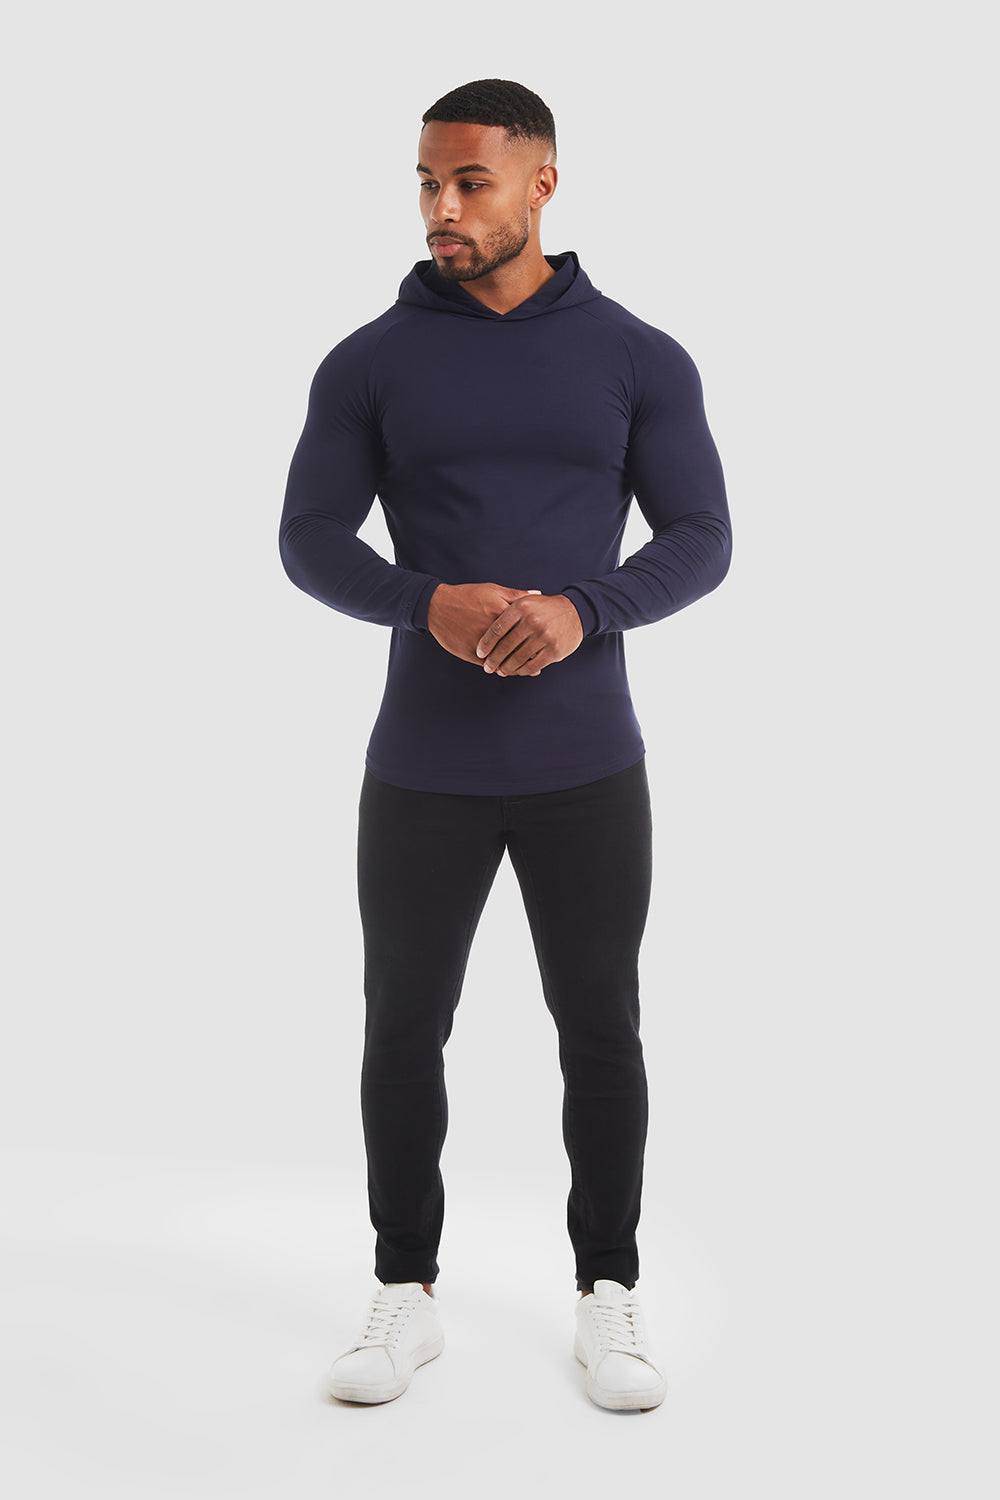 Hooded Top (LS) in True Navy - TAILORED ATHLETE - ROW